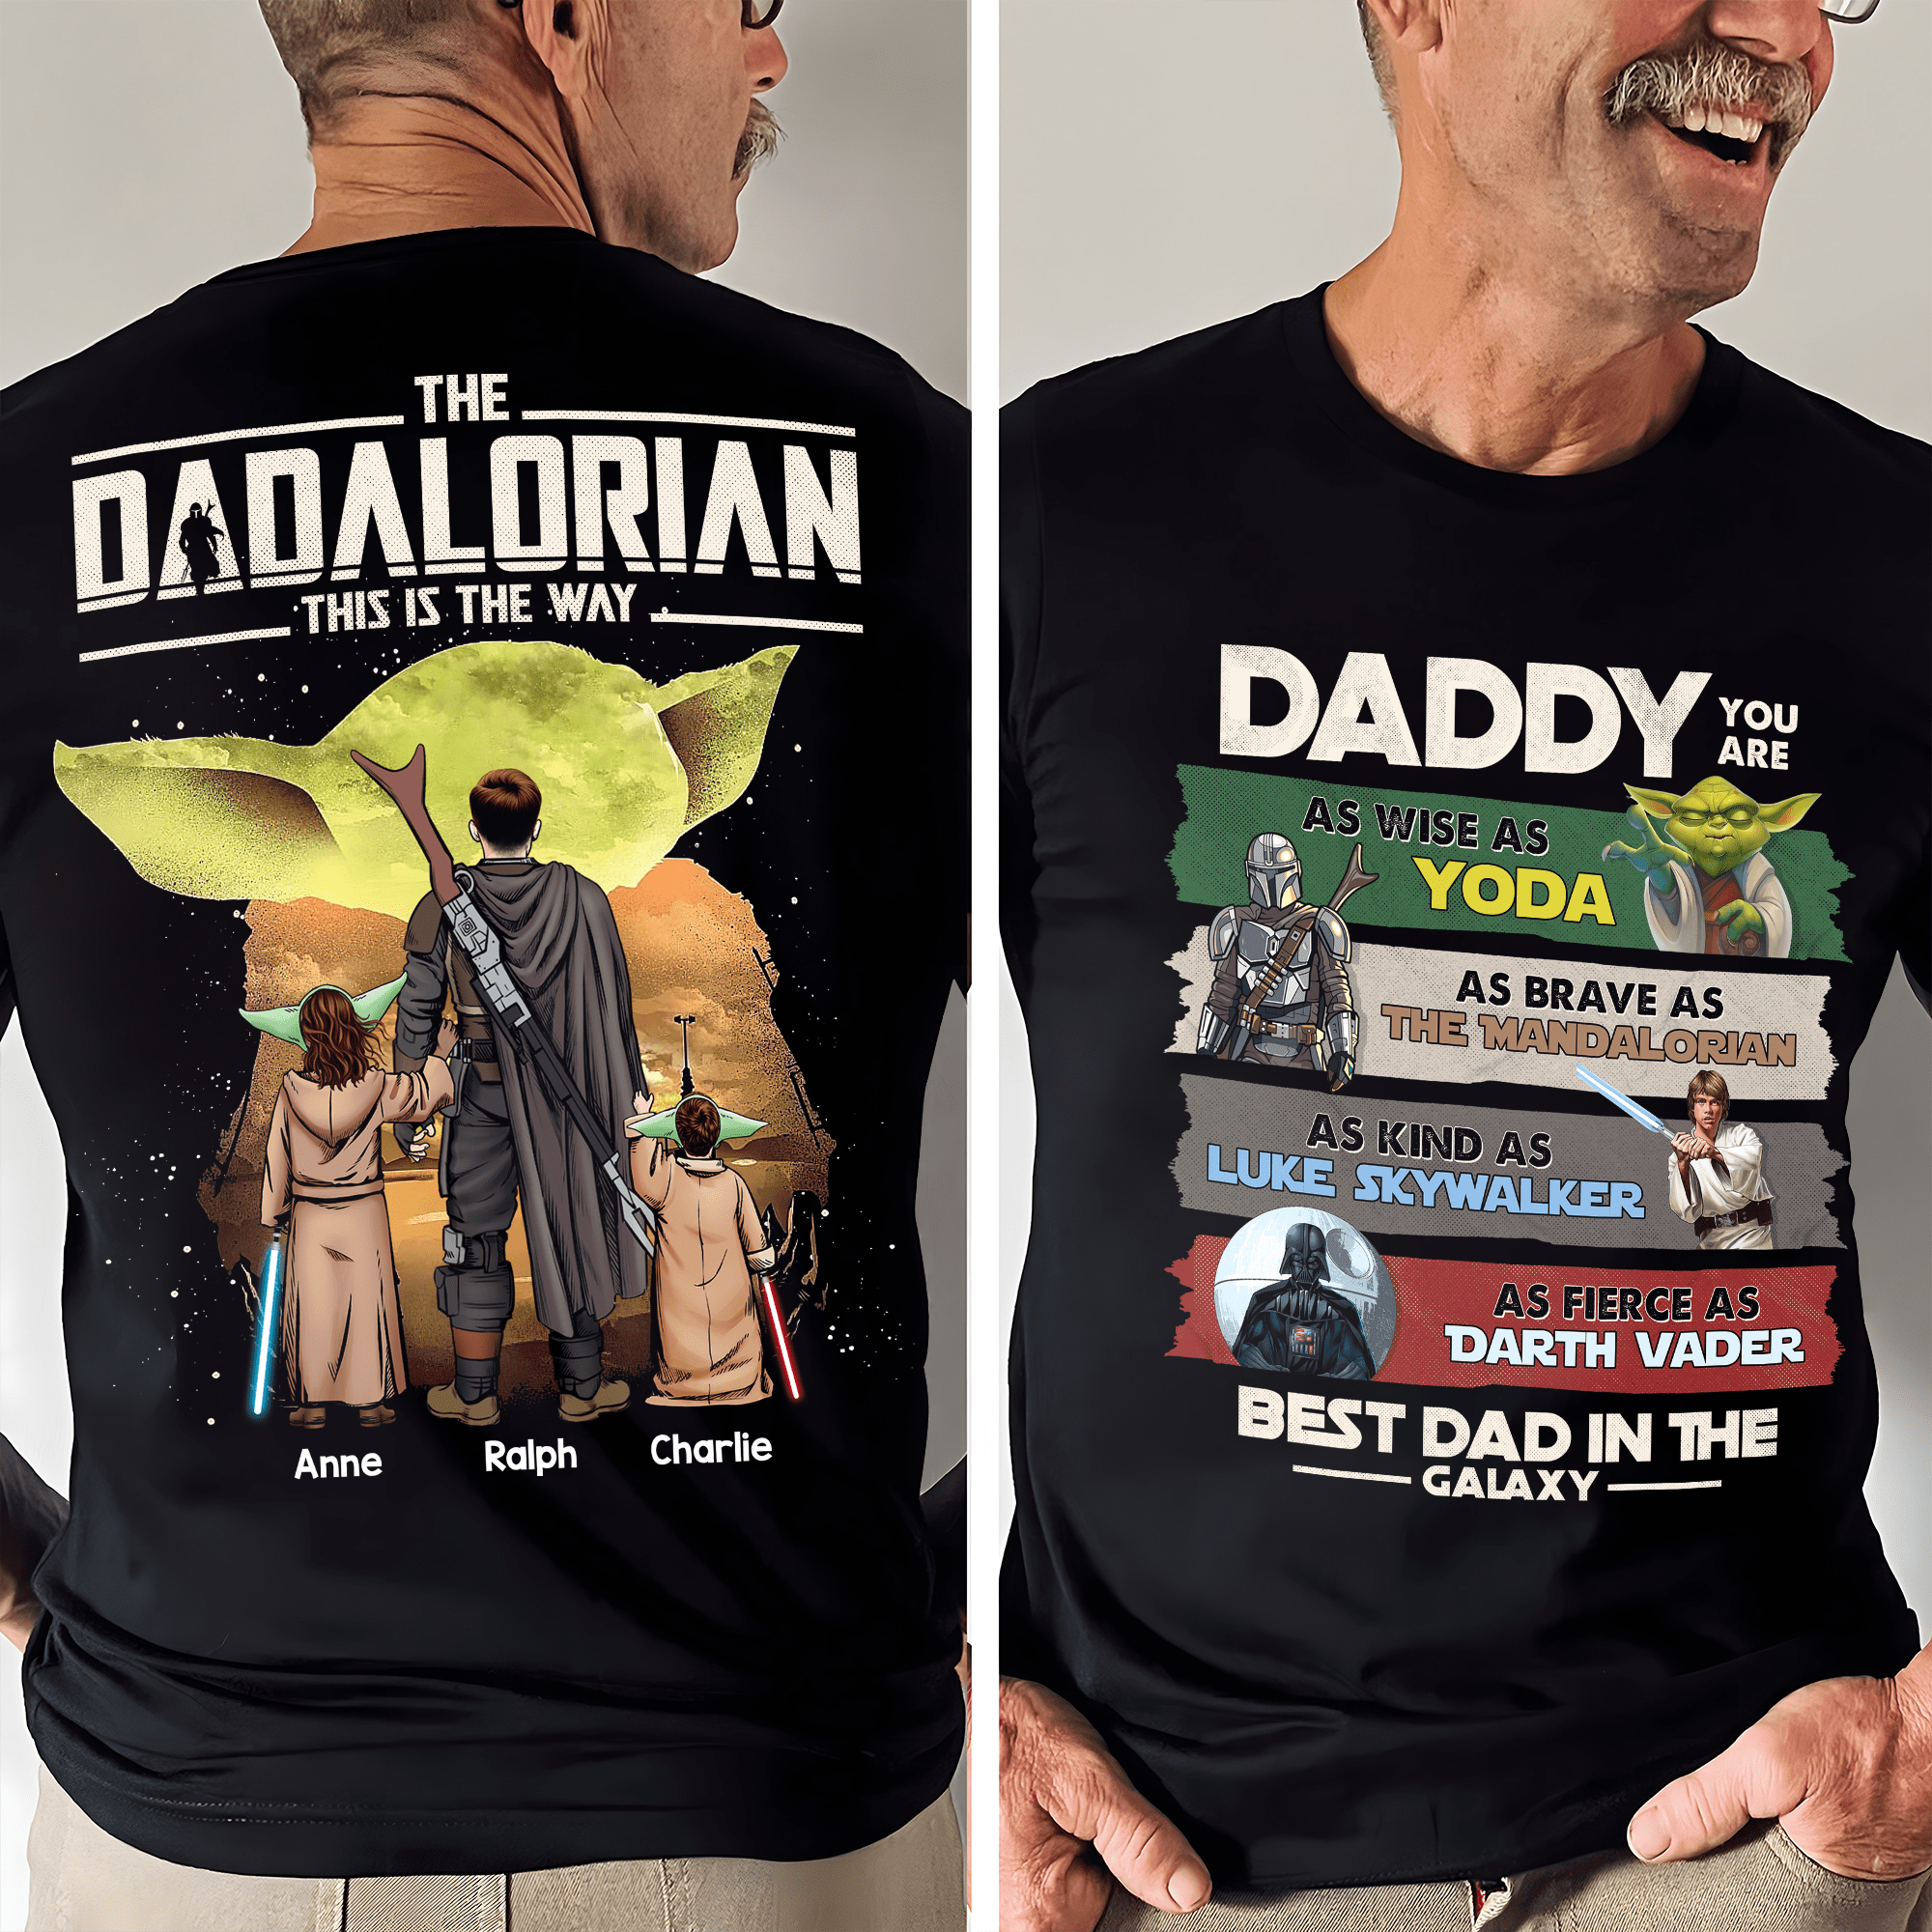 Personalized Gifts For Dad Shirt 03HUHU030524HHHG Father's Day-Homacus